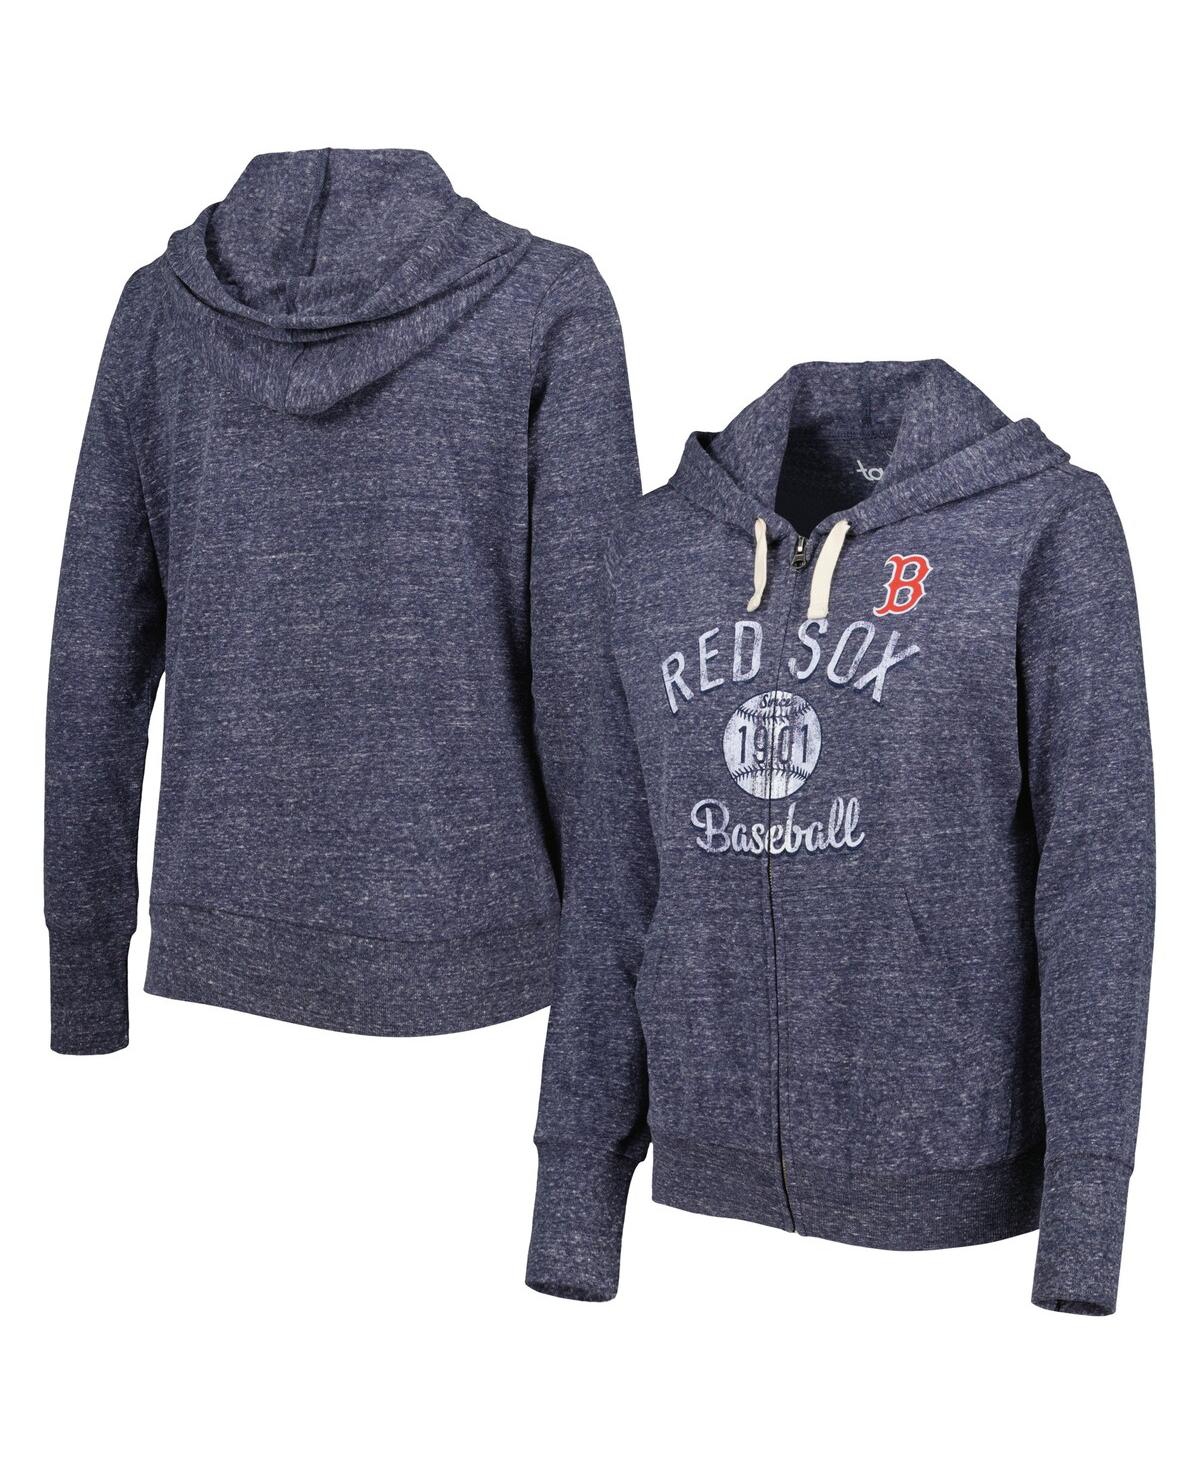 Touché Women's Touch Navy Boston Red Sox Training Camp Tri-blend Full-zip Hoodie